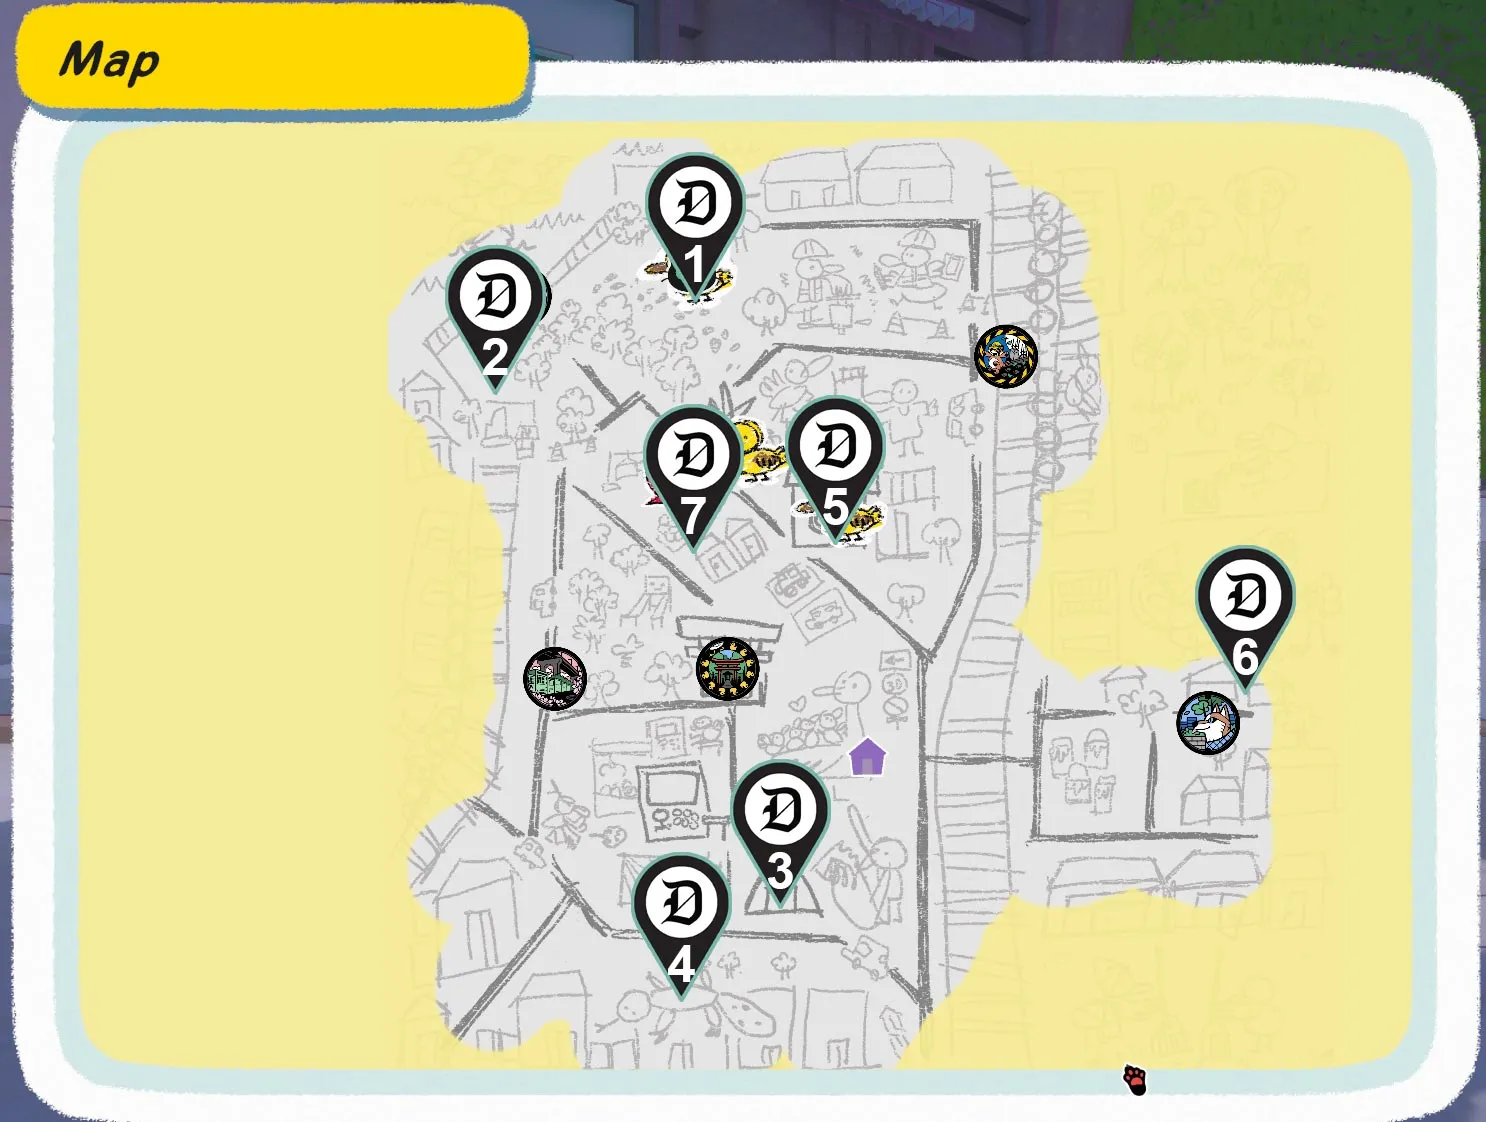 All nap spots marked on the map in Little Kitty Big City.